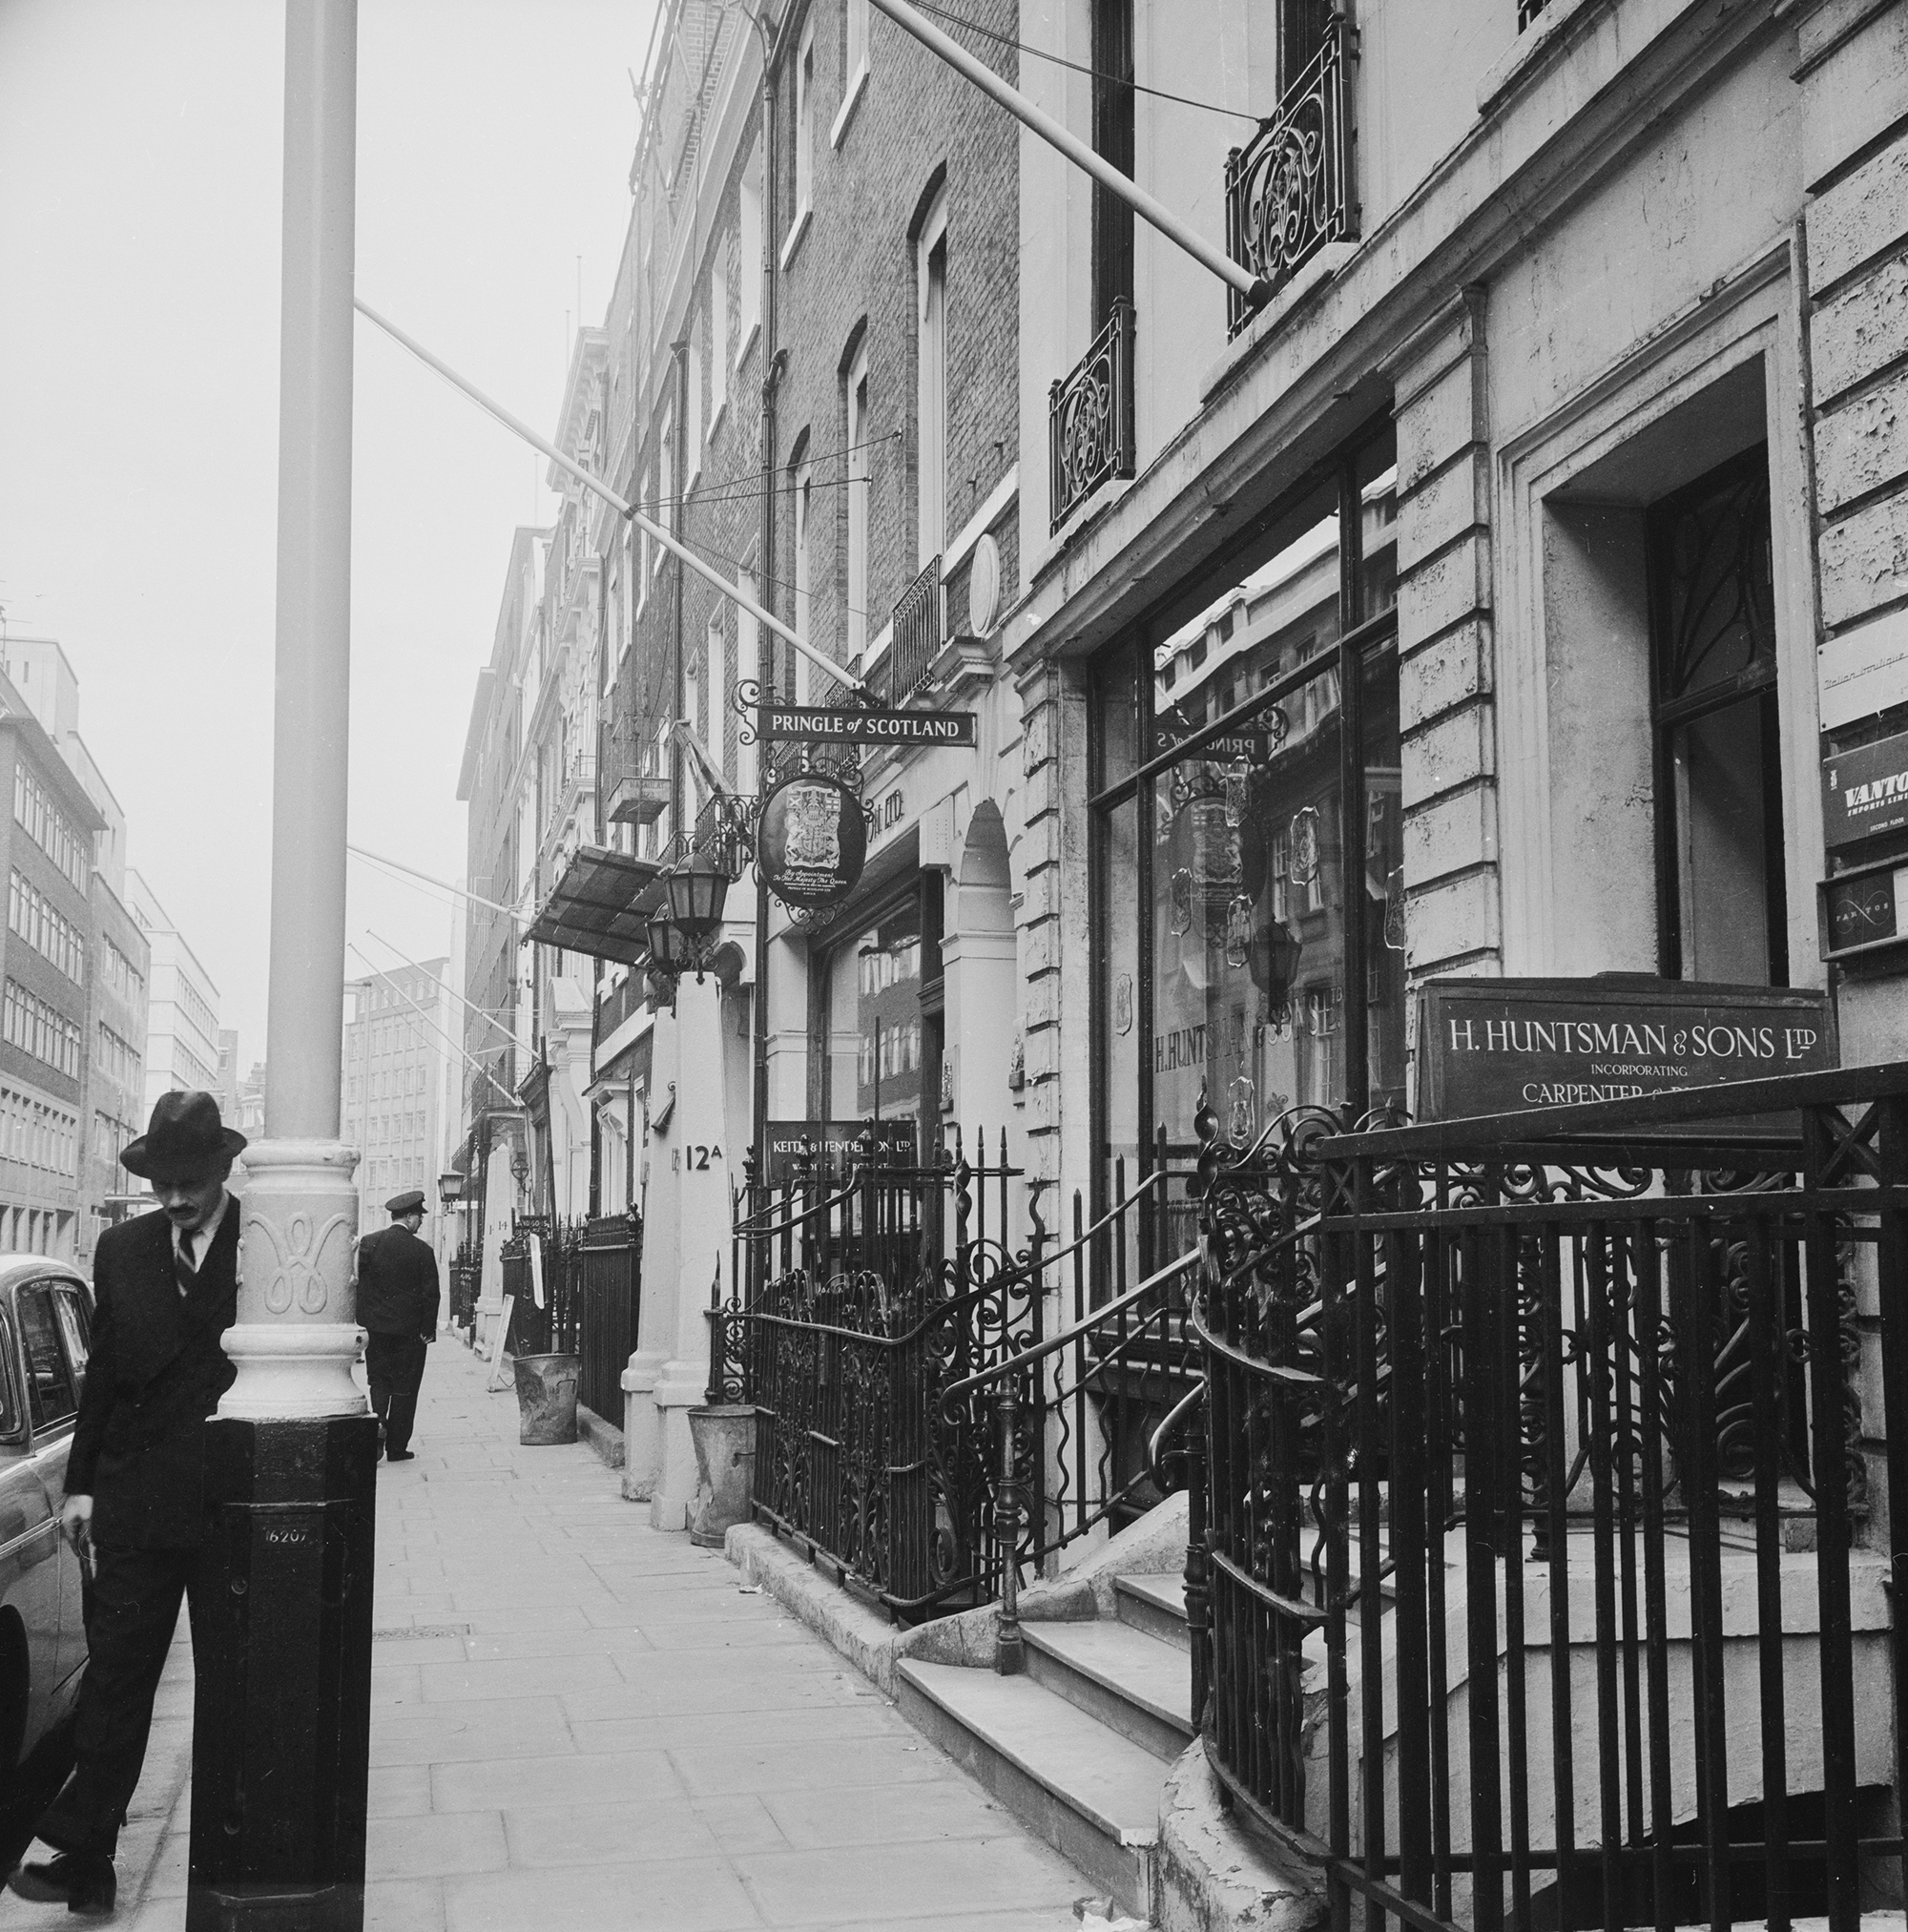 Shops on Savile Row, known as the center for quality men’s suits and tailoring, 1965.